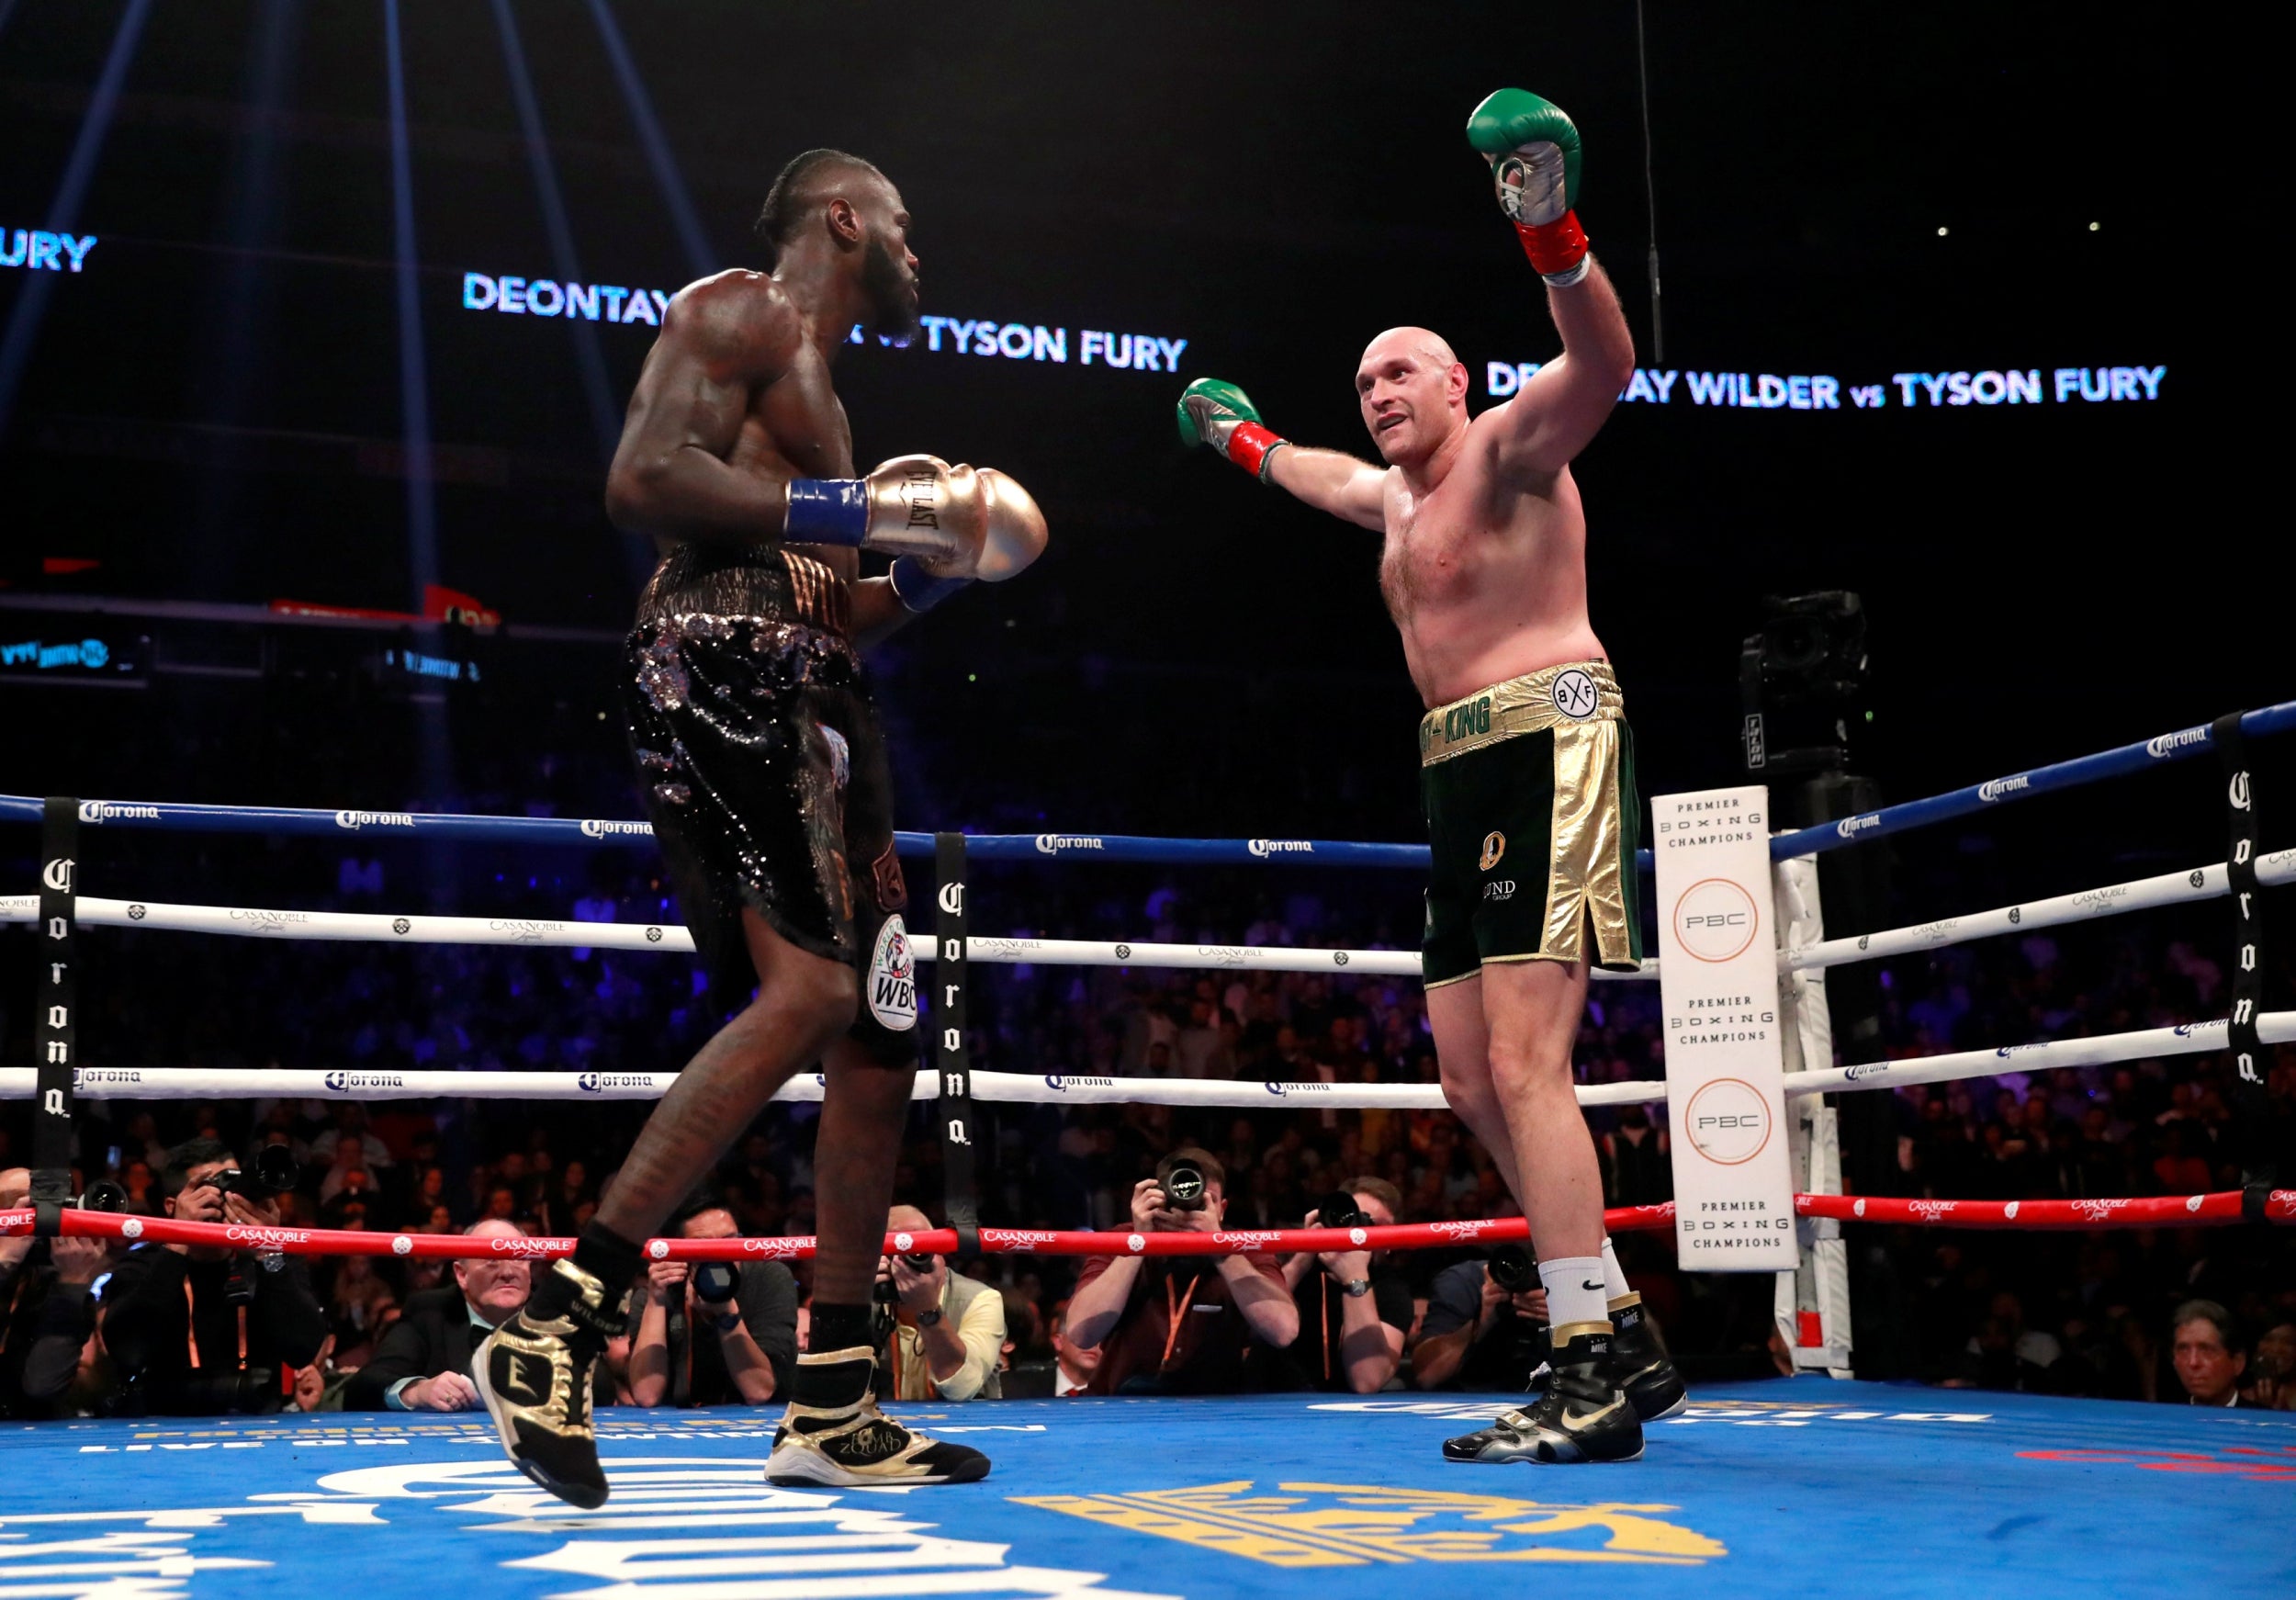 Deontay Wilder / Tyson Fury Return Fight Now Ordered By The WBC; If No Deal  Reached By Feb. 5th Fight Will Go To Purse Bid - Latest Boxing News